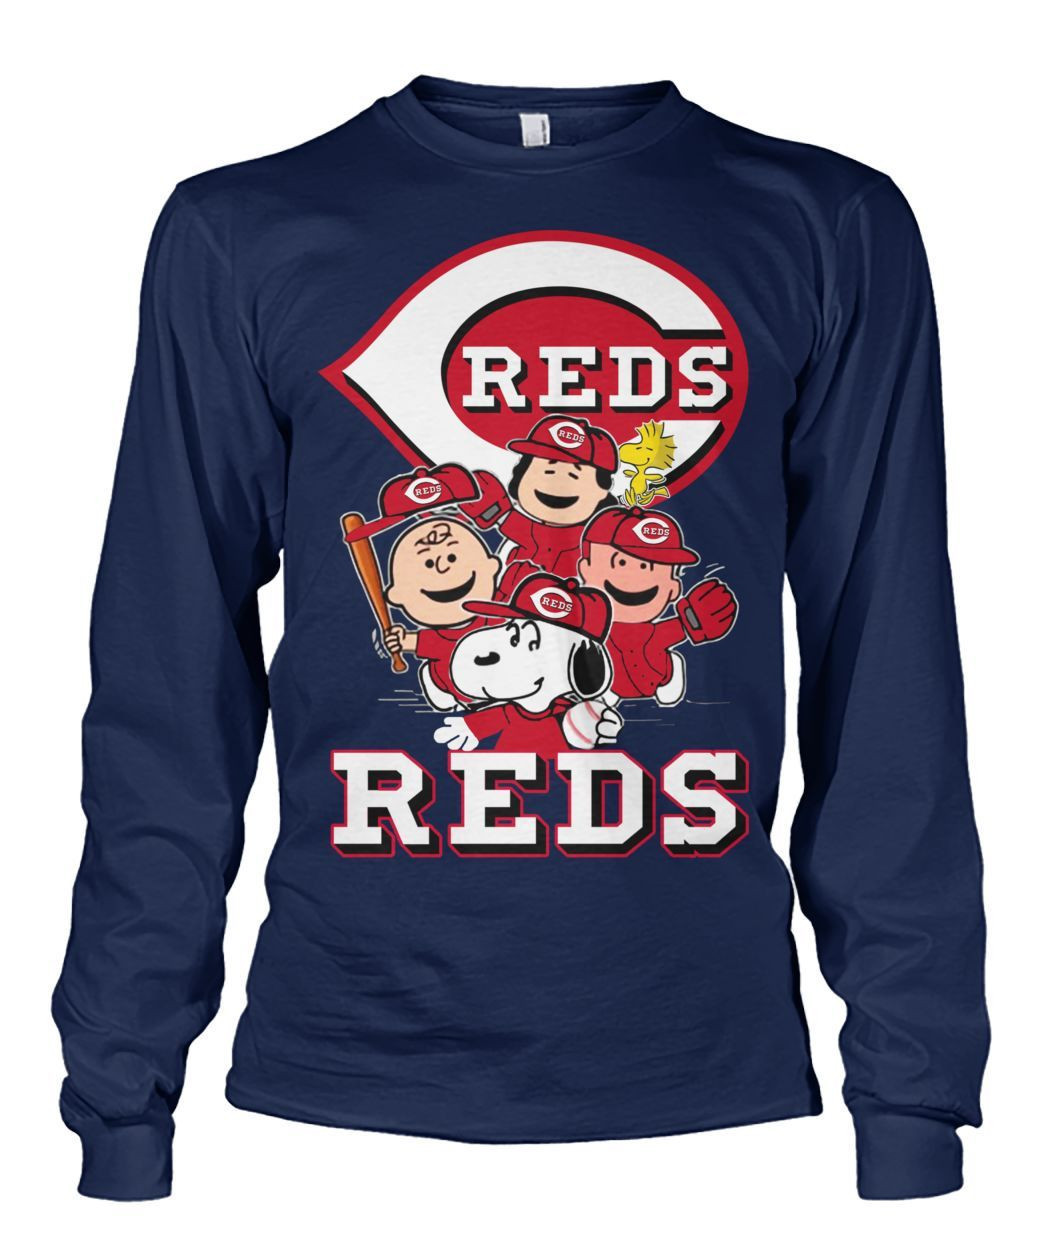 Chicago Reds Baseball Team Fans Charlie Brown Woodstock Snoopy And Friends Disney Fans Shirt